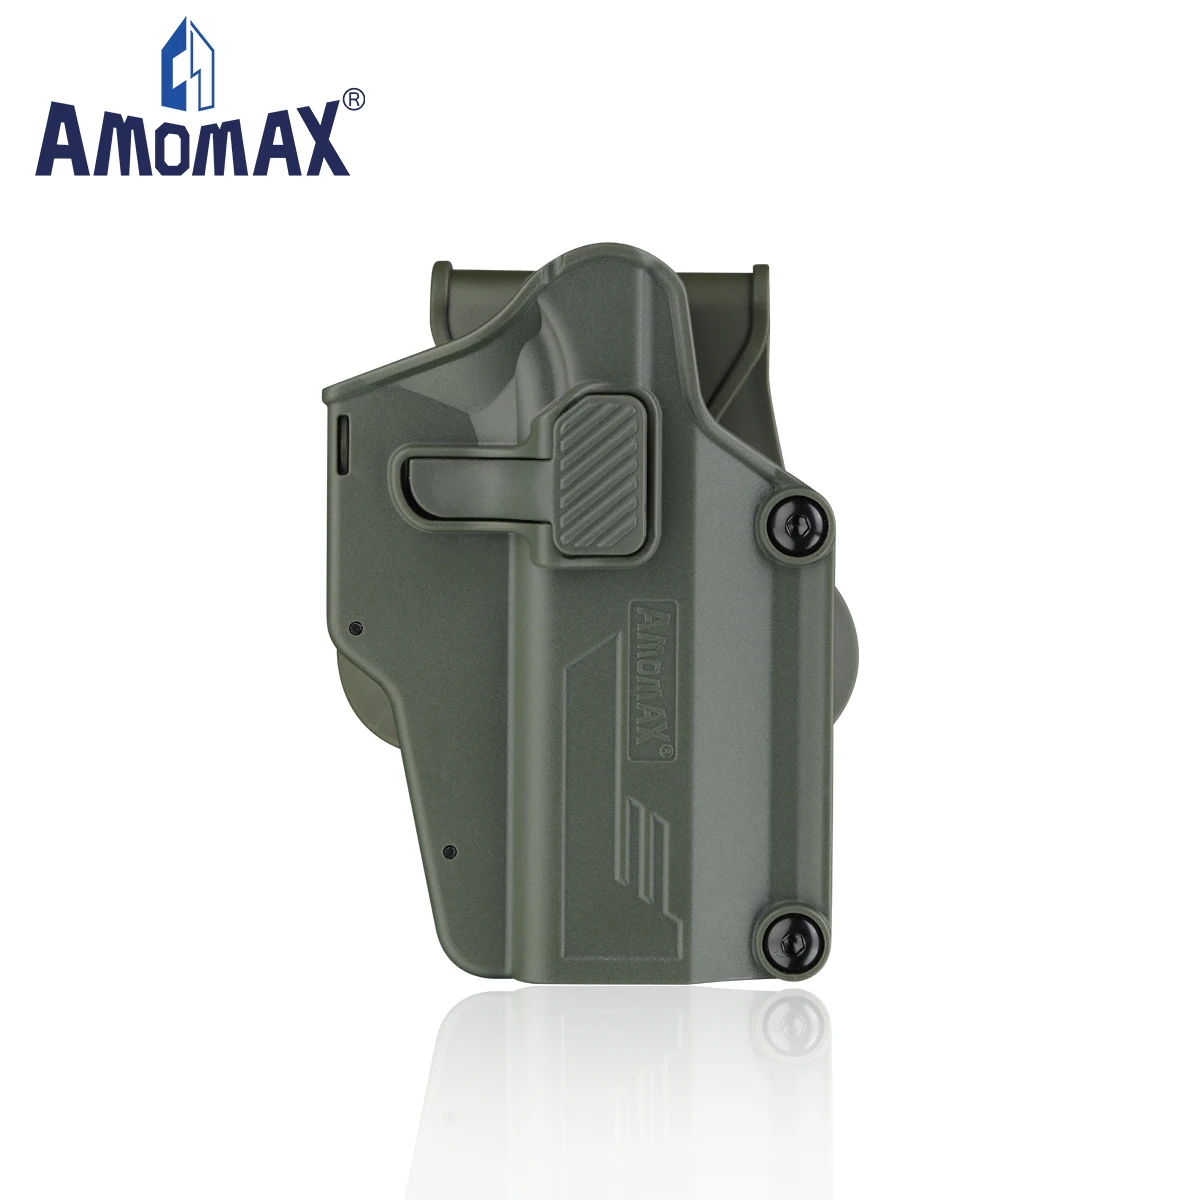 

Amomax multi fit gun plastic concealed carry holster, fit for more than 100 different guns, airsoft, gel blaster, Black,fed, green